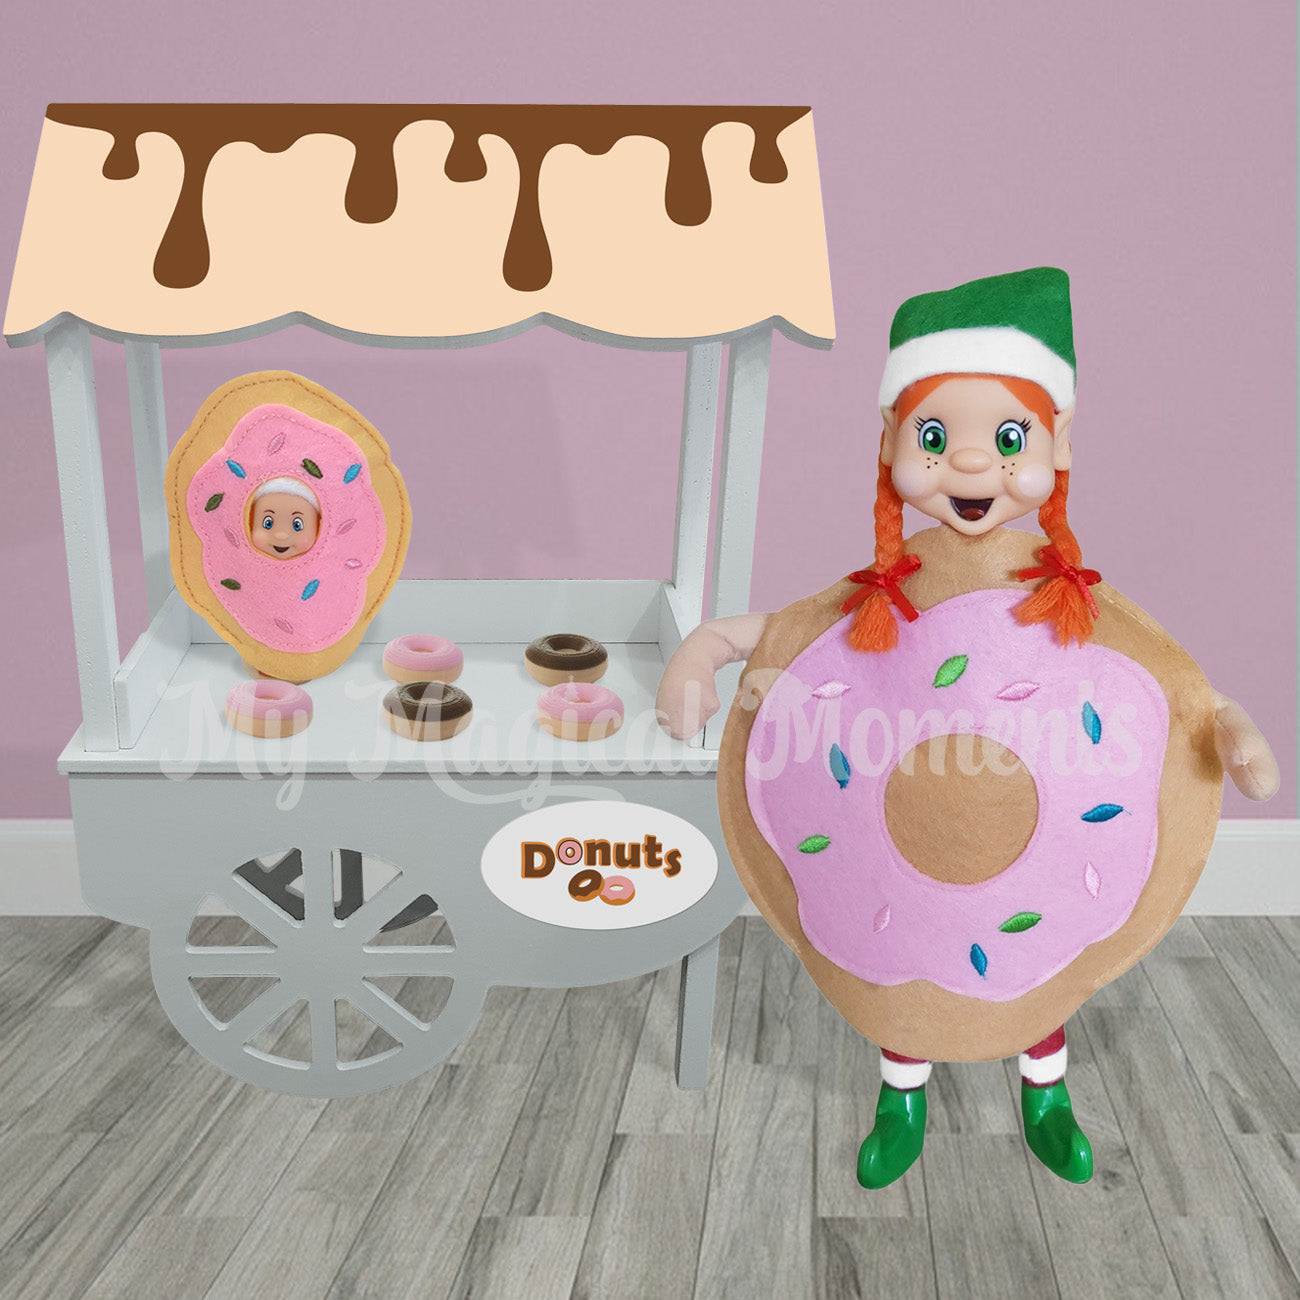 Elf dressed as a donut standing in front of a doughnut store with a baby elf dressed as a donut